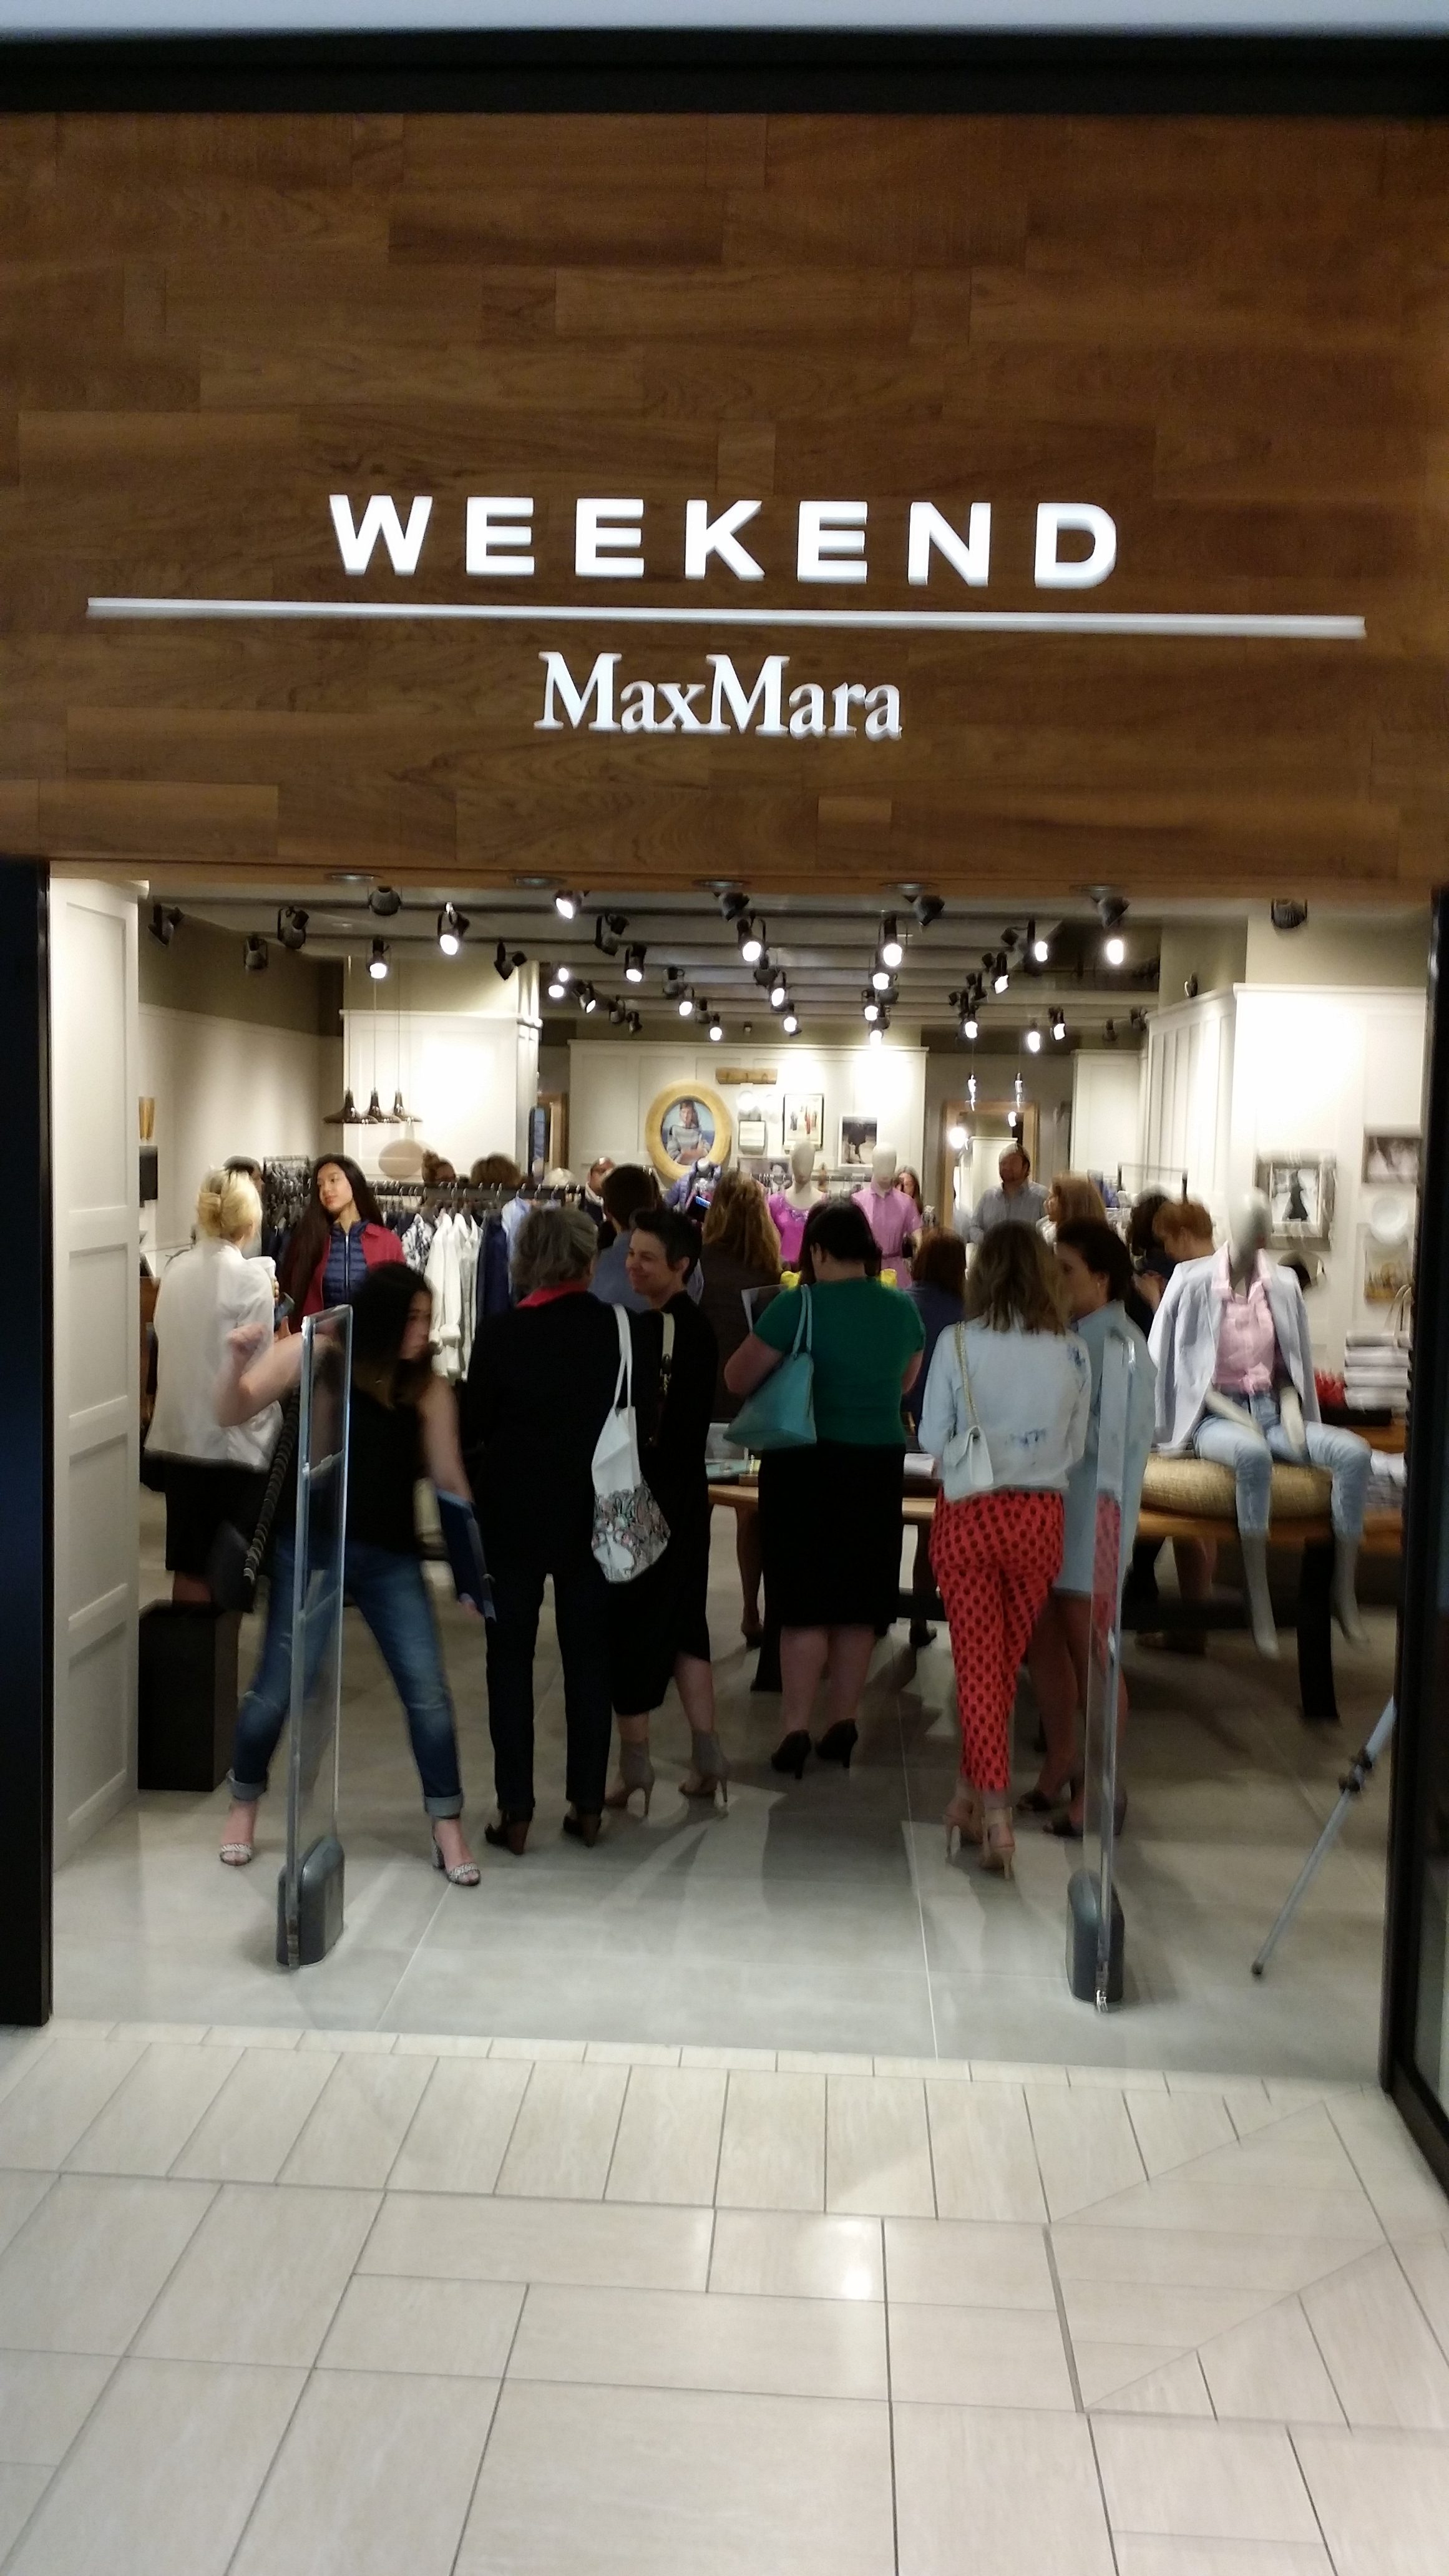 Public relations to launch Weekend MaxMara in Calgary's Chinook Centre